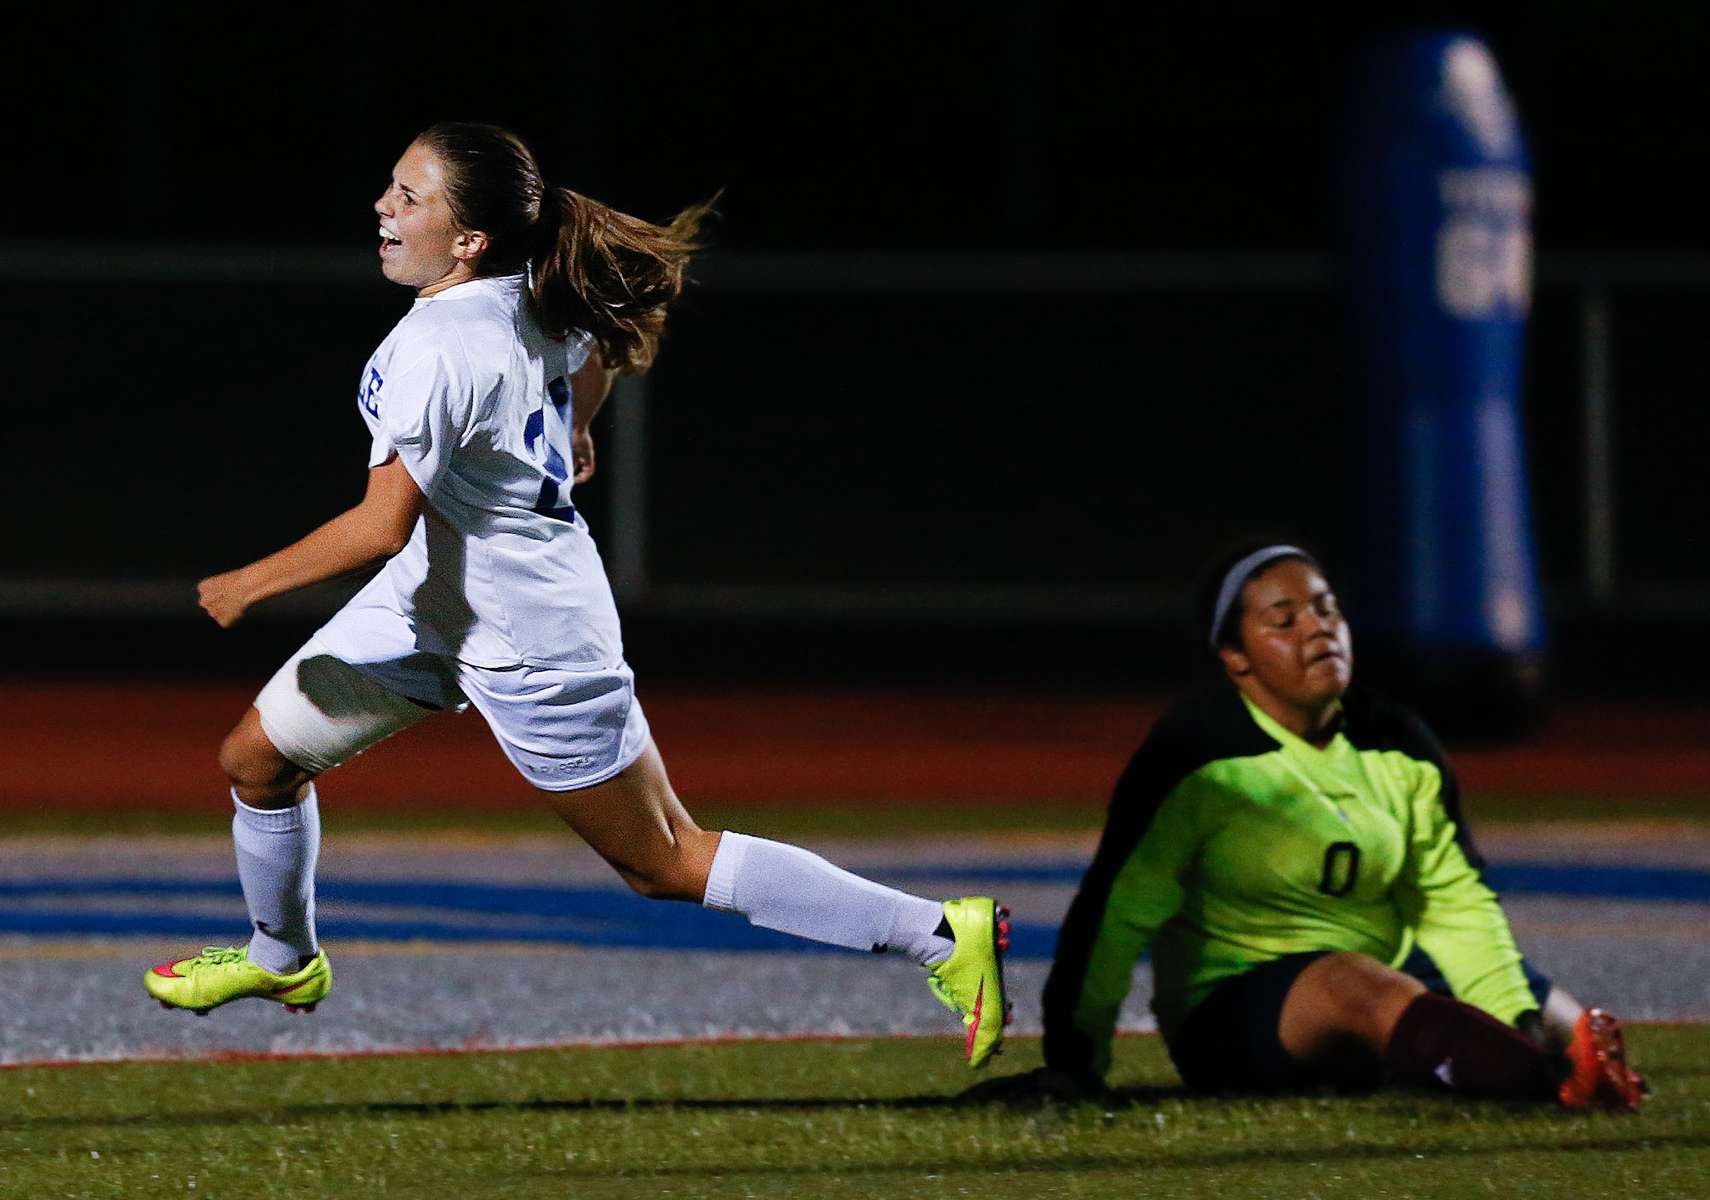 Erin Wimmer of Sayrevile scores against South RIver goalie Breona Hill as Sayreville won 5-1 to advance in the State Playoffs. 